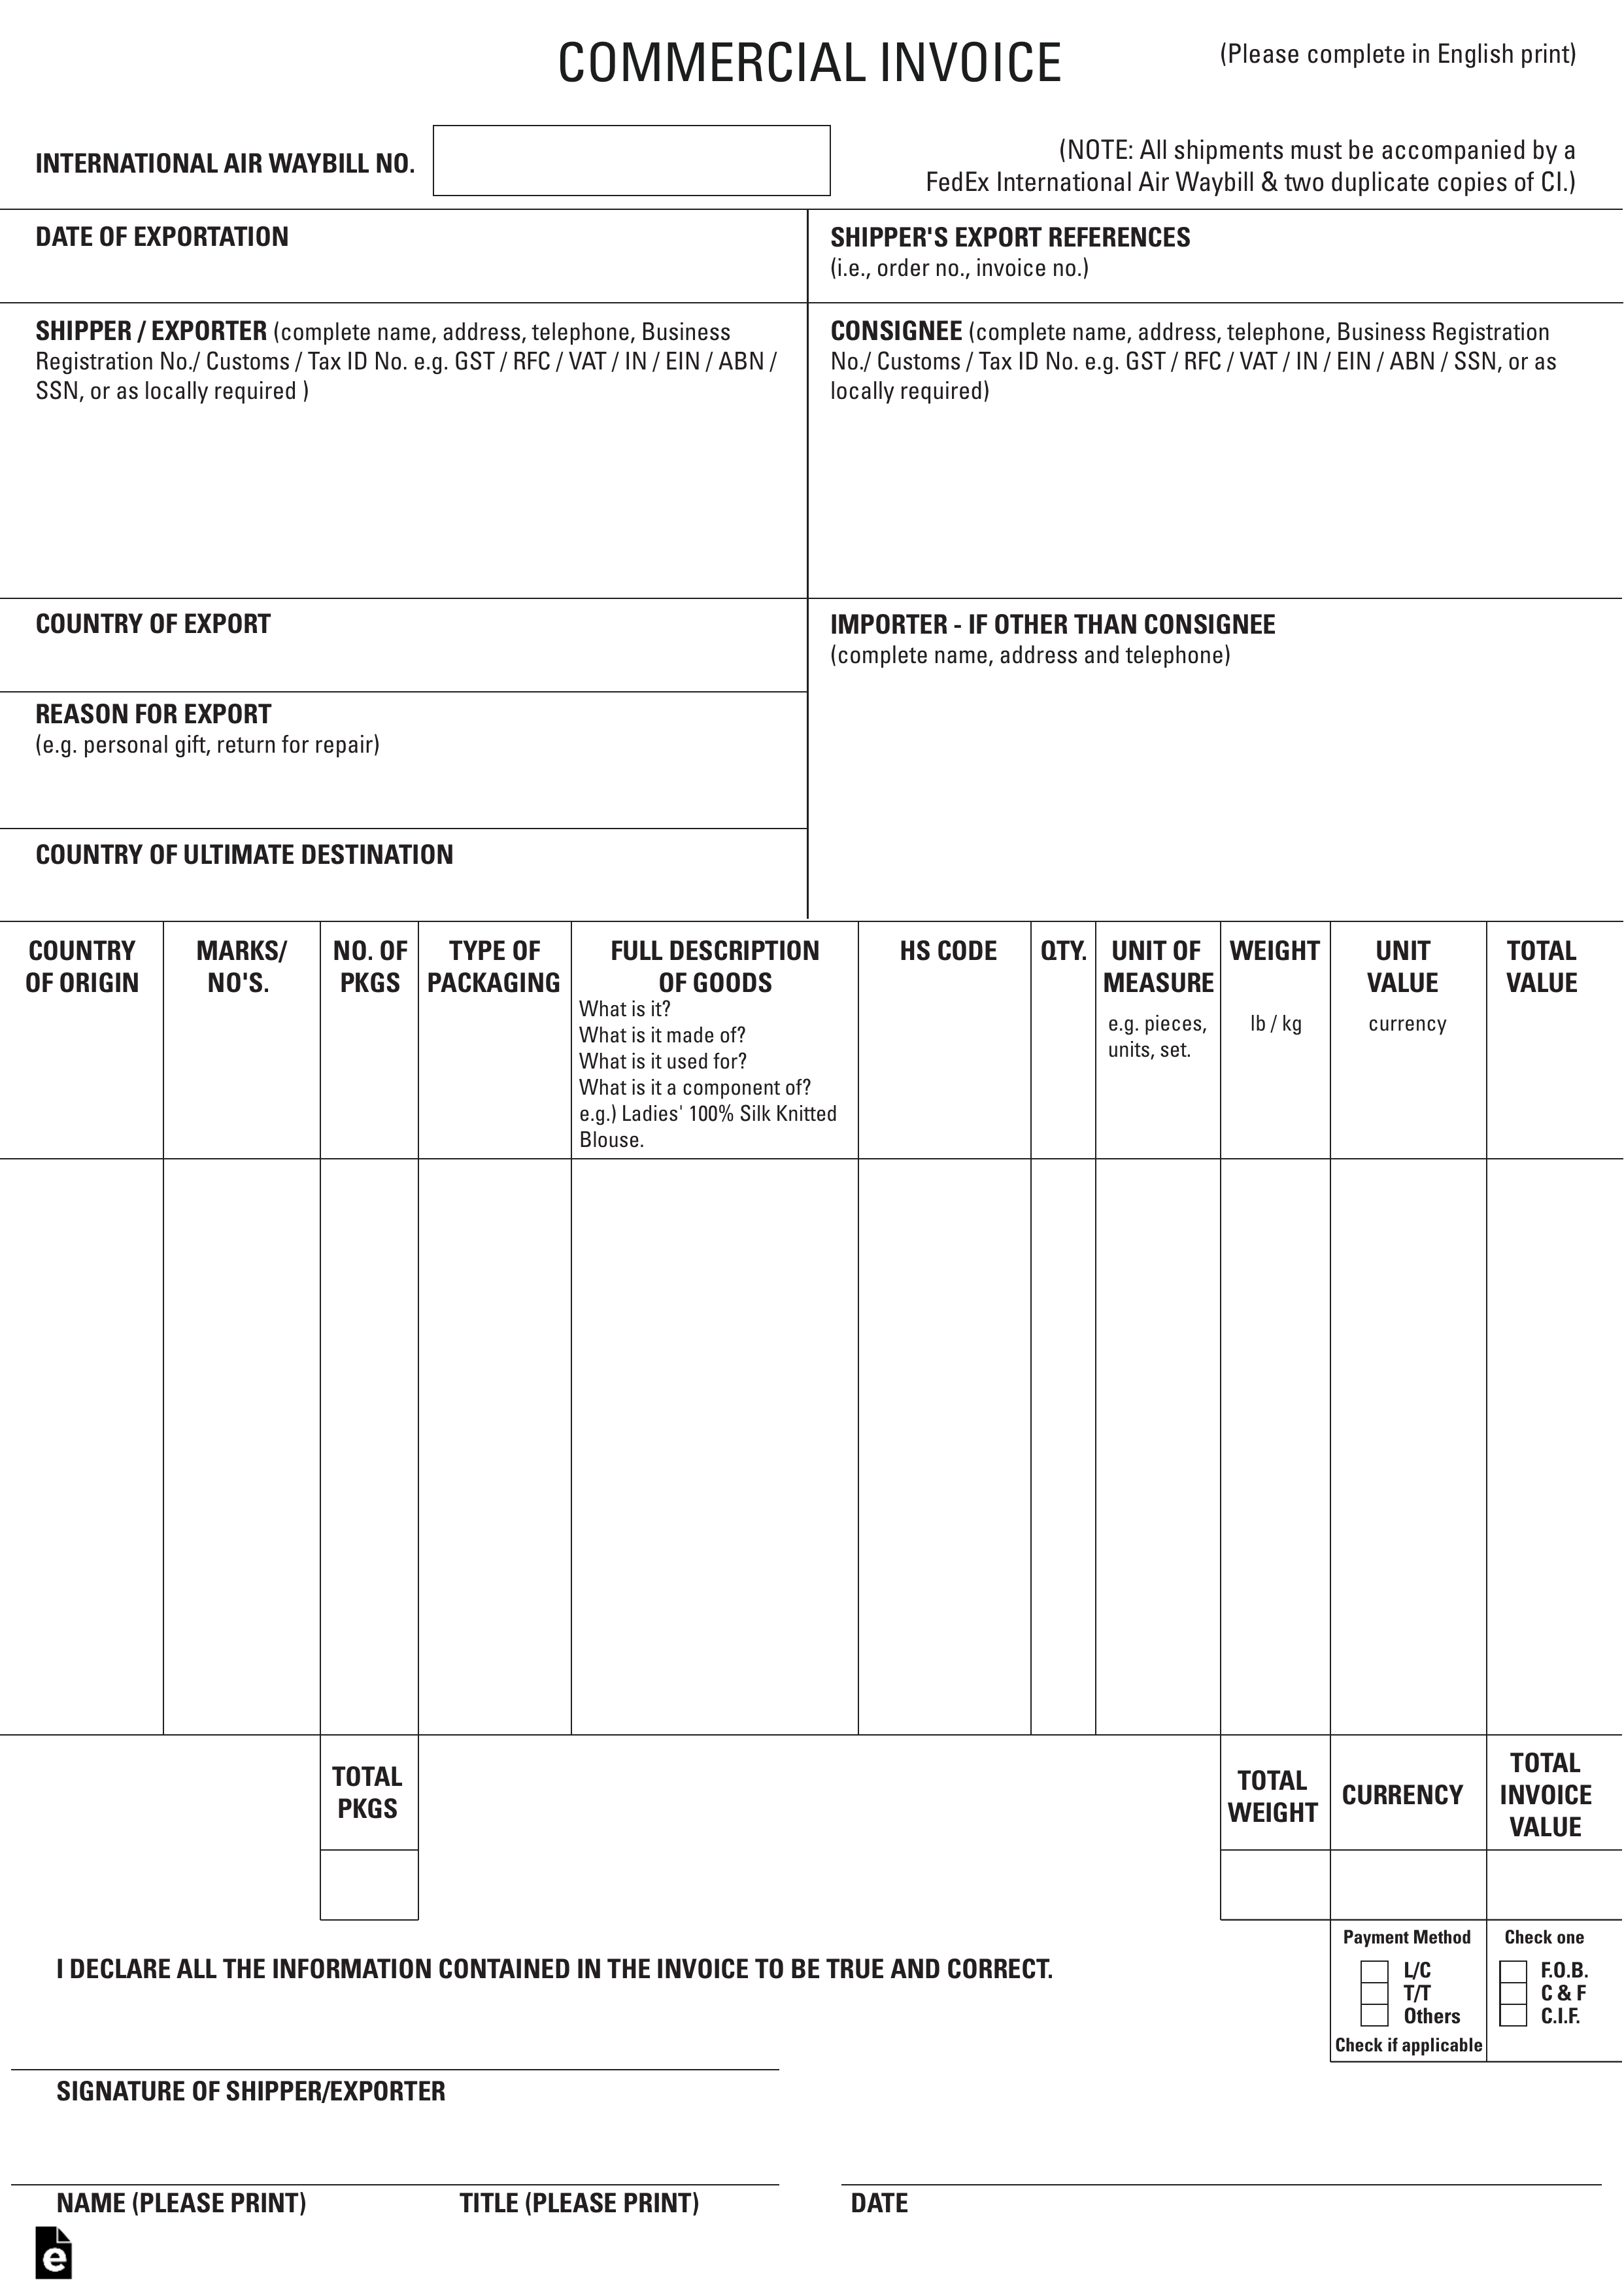 Free International Commercial Invoice Templates - Pdf in International Shipping Invoice Template